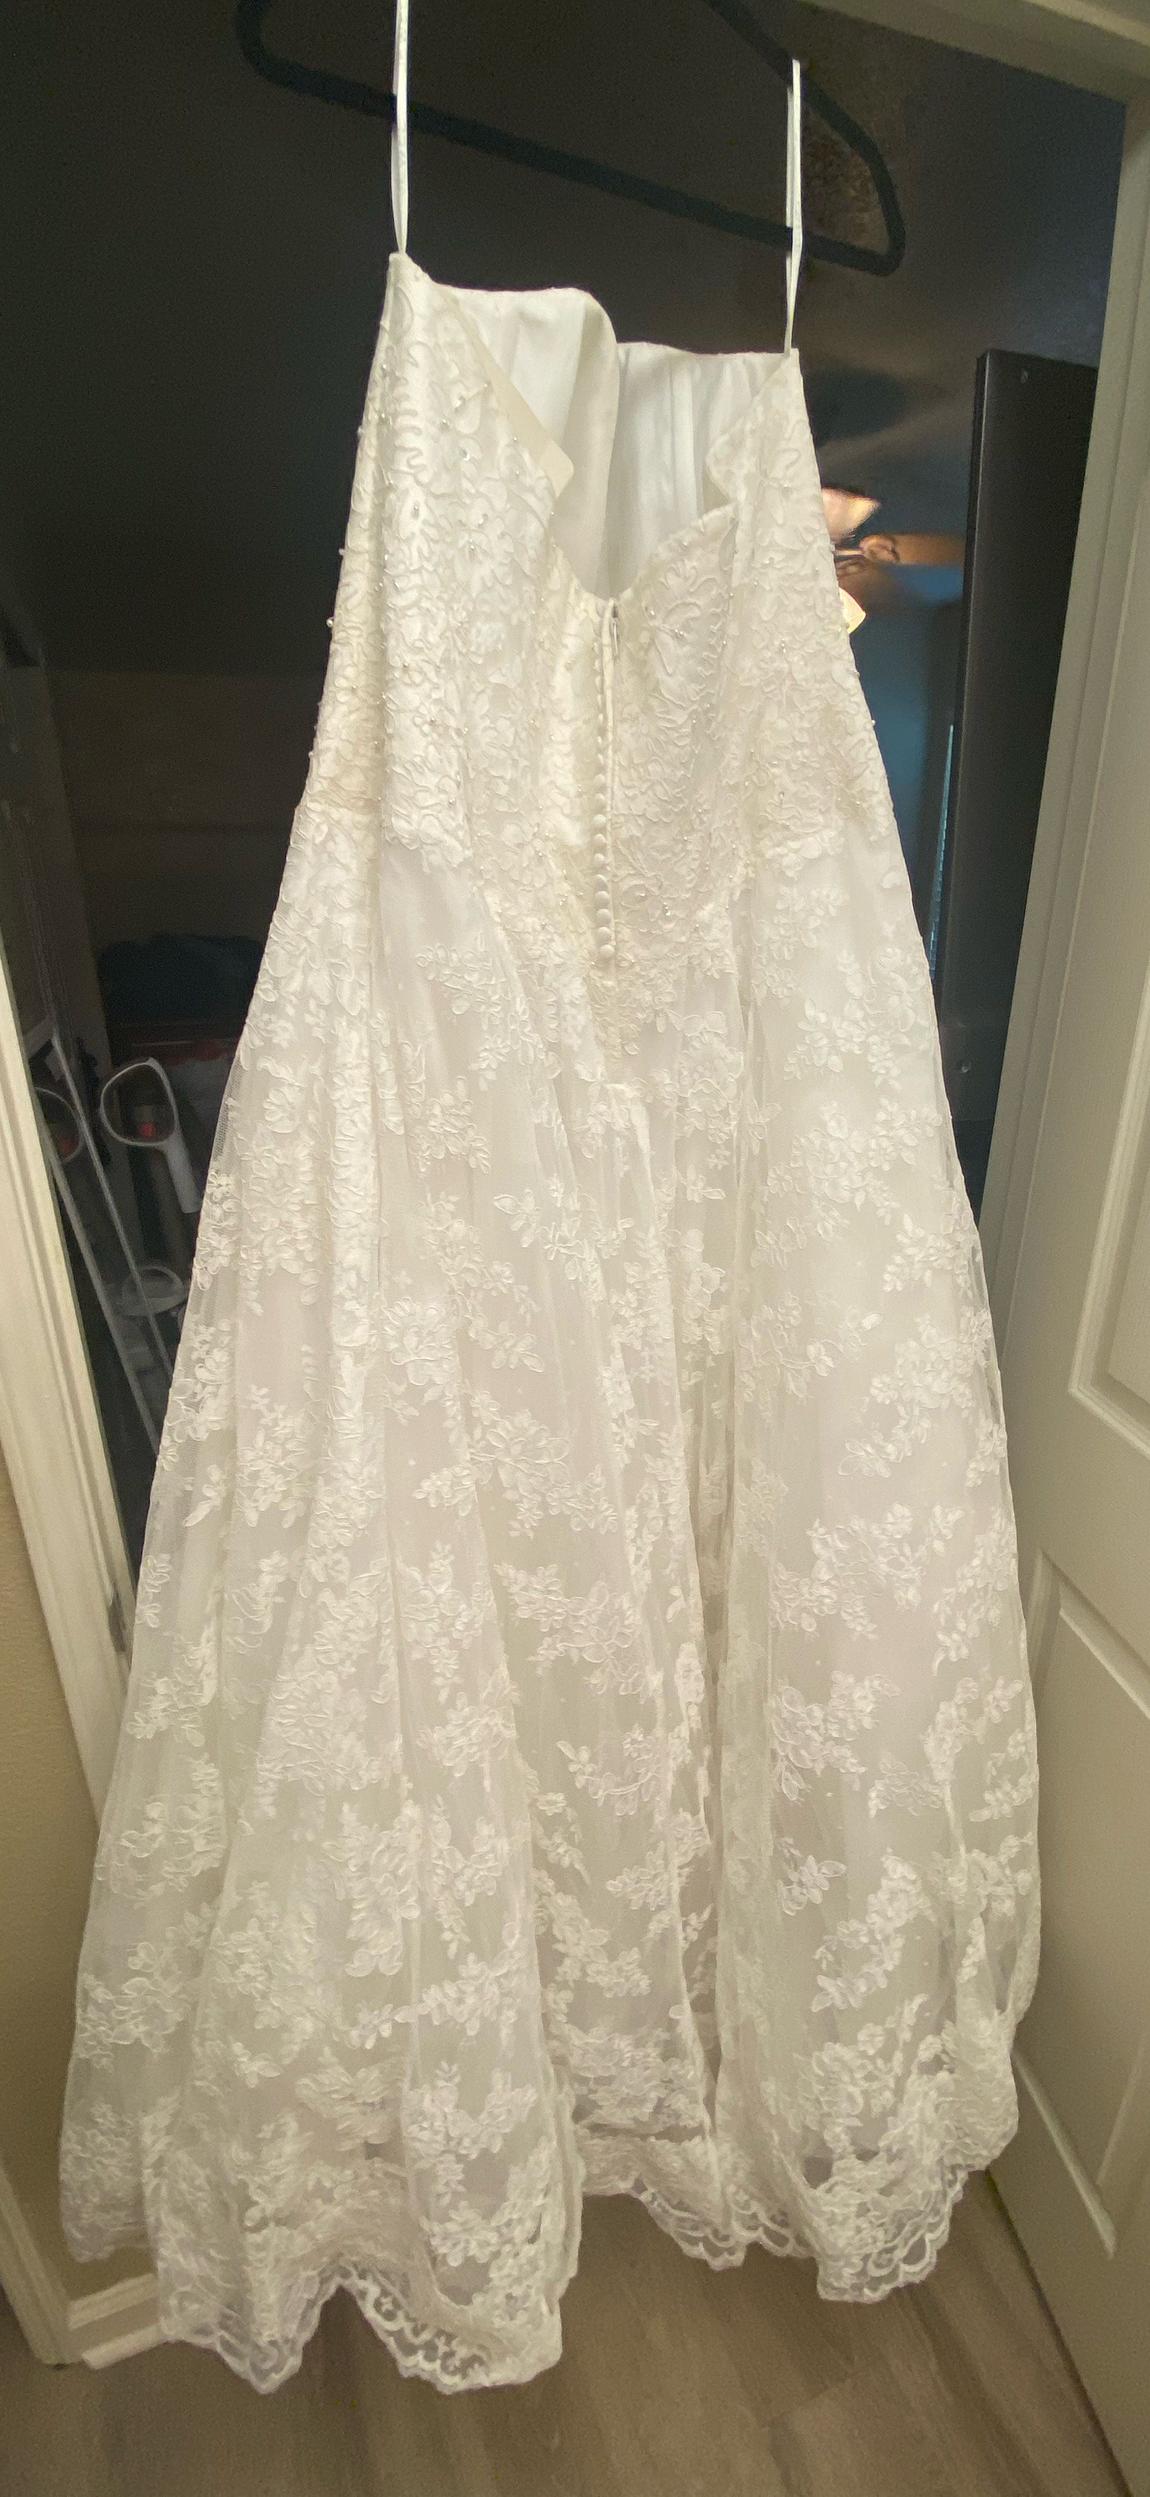 Jewel by David’s bridal Plus Size 22 White Ball Gown on Queenly